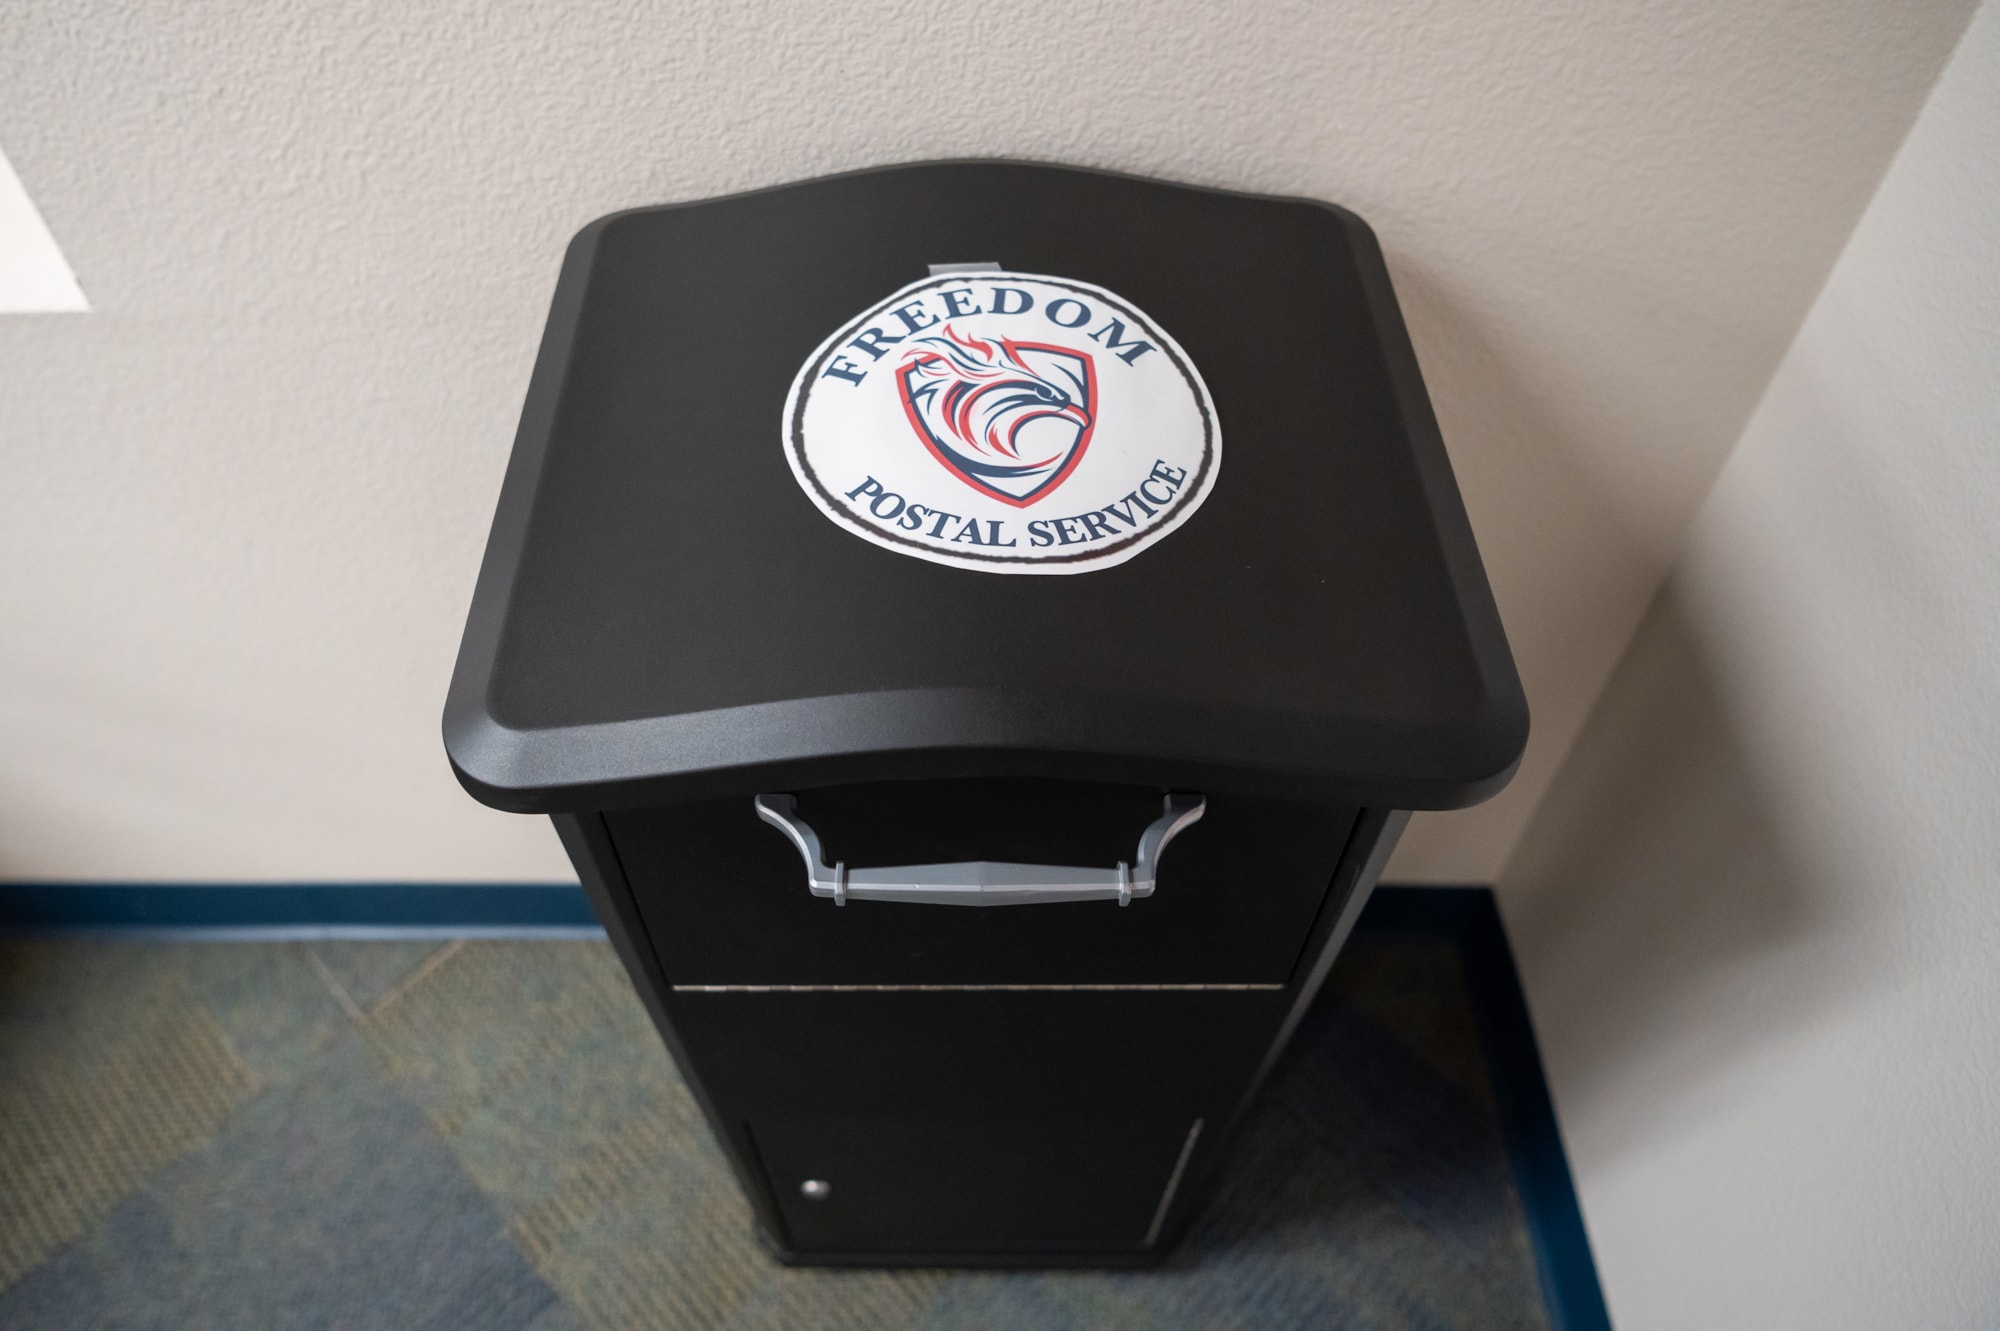 The central mail drop is seen in the front area of Freedom Traditional Academy.  Parents and staff can drop off their letters in this large mail box, which will be collected, sorted, and delivered on each Friday at the school.